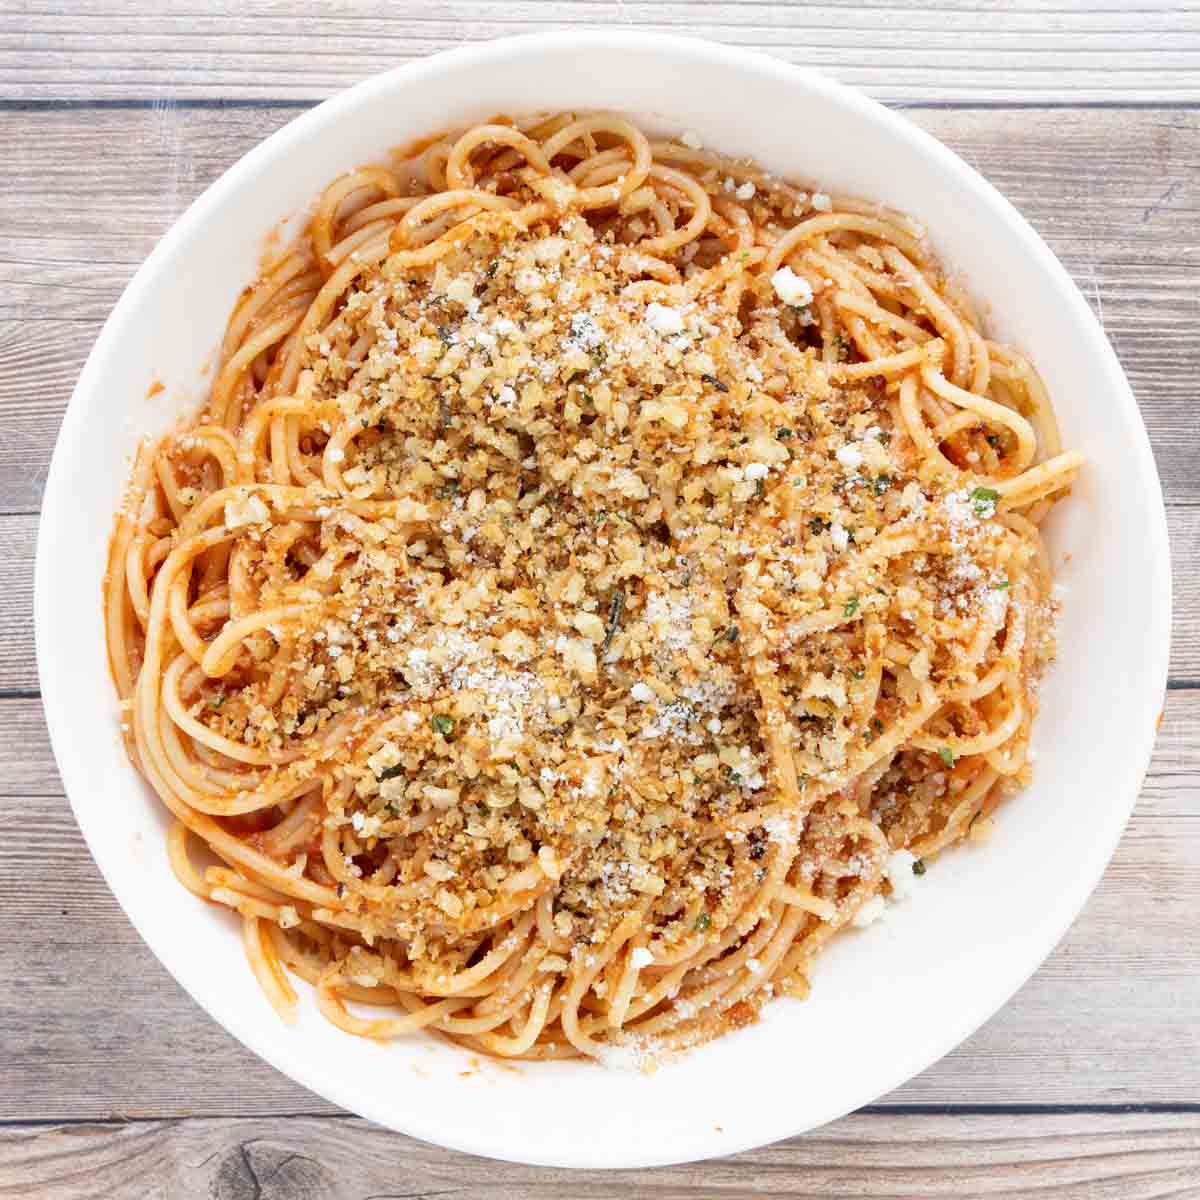 Spaghetti with red sauce topped with pangrattato and grated cheese in a white bowl.